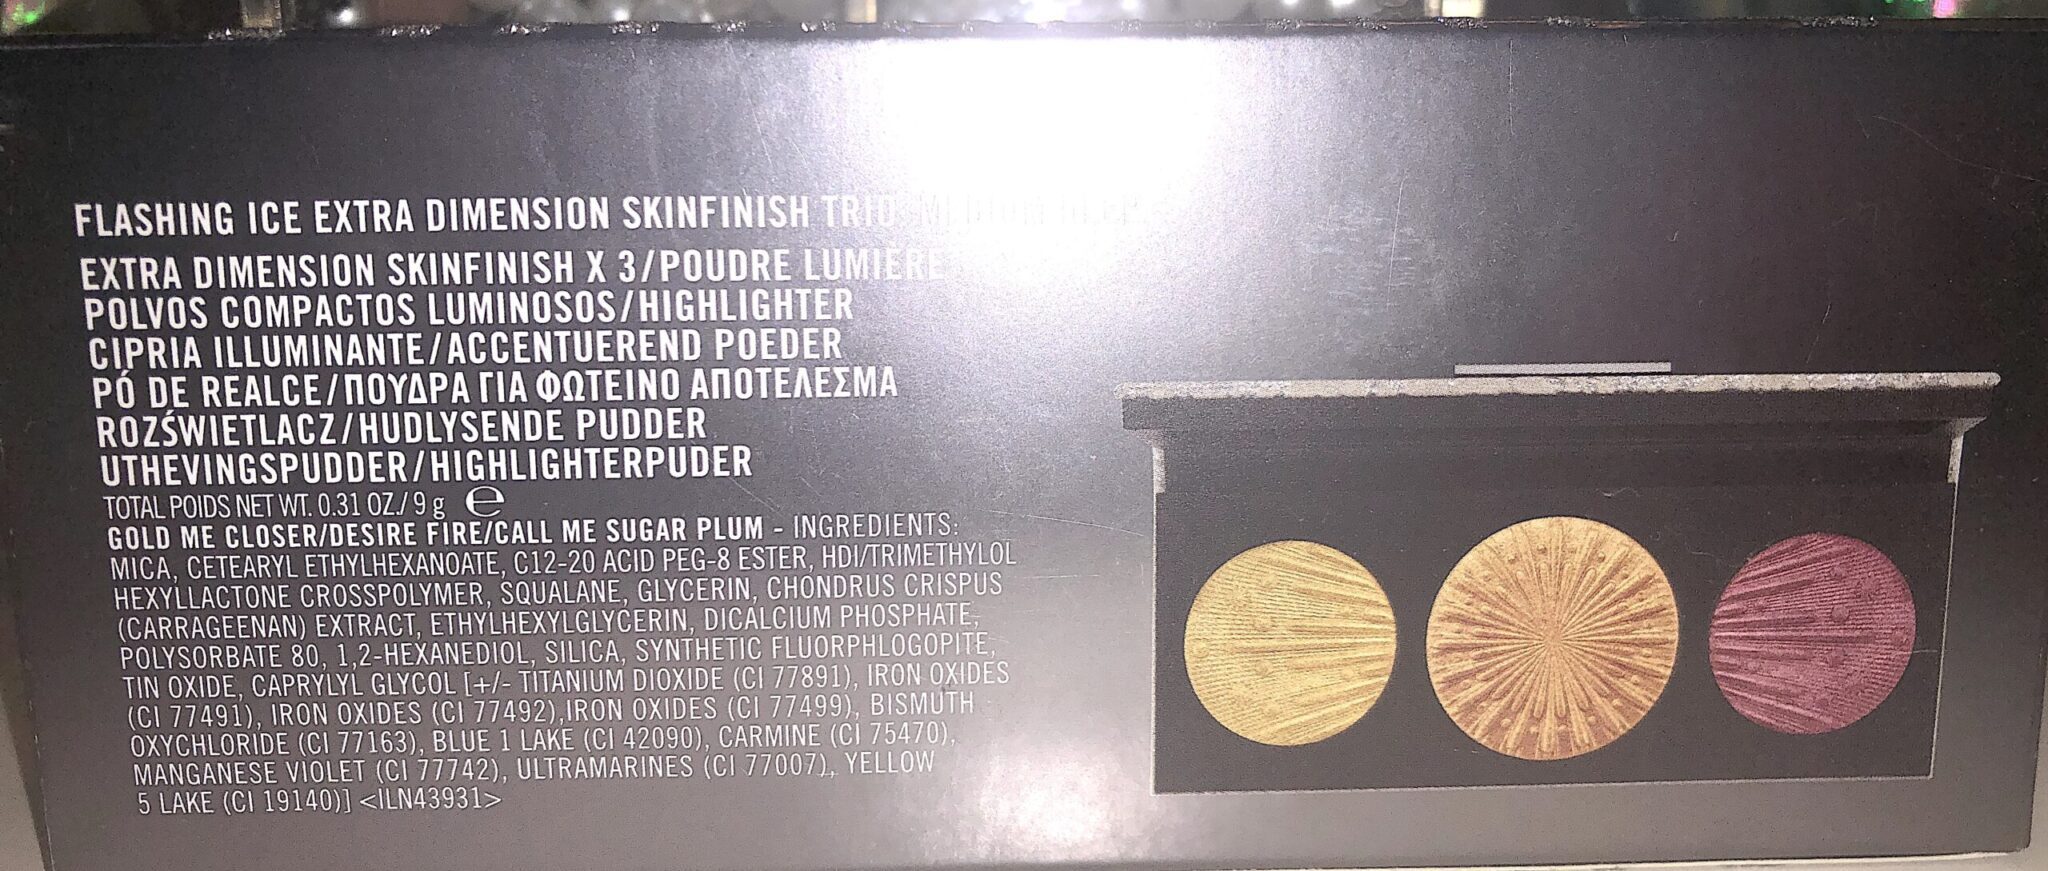 THE INGREDIENTS FOR FLASHING ICE EXTRA DIMENSION SKINFINISH TRIO MEDIUM DEEP